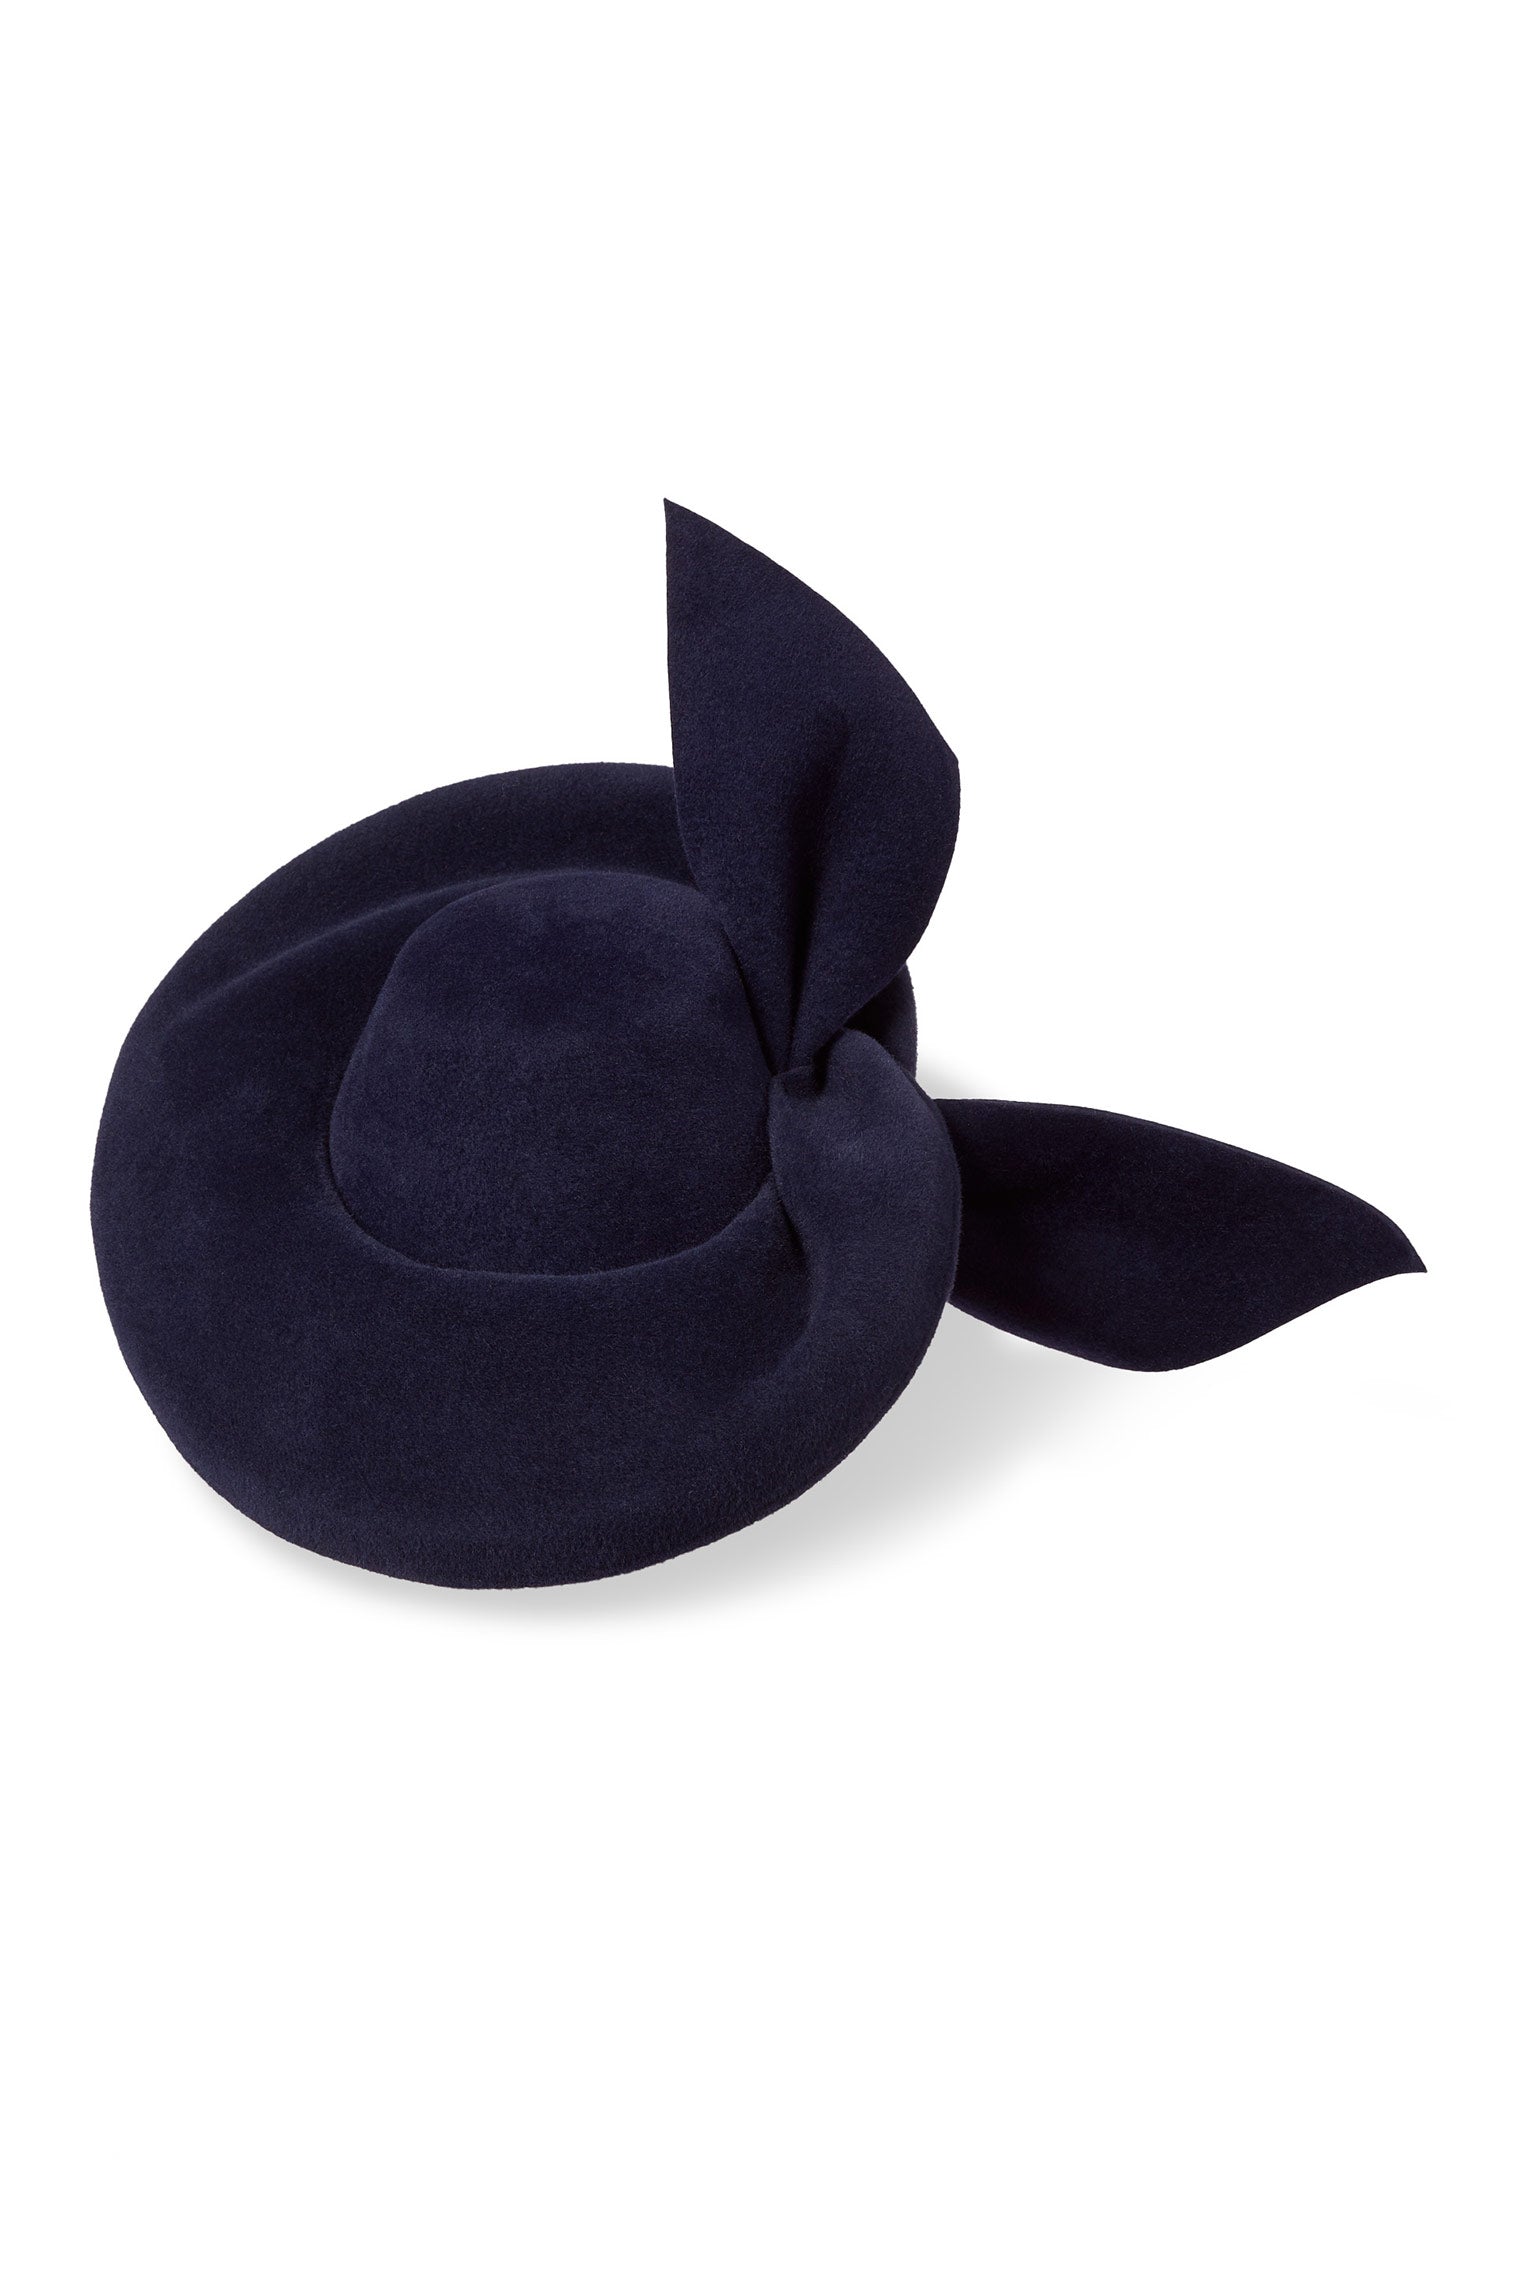 Hedy Navy Percher Hat - Lock Couture by Awon Golding - Lock & Co. Hatters London UK